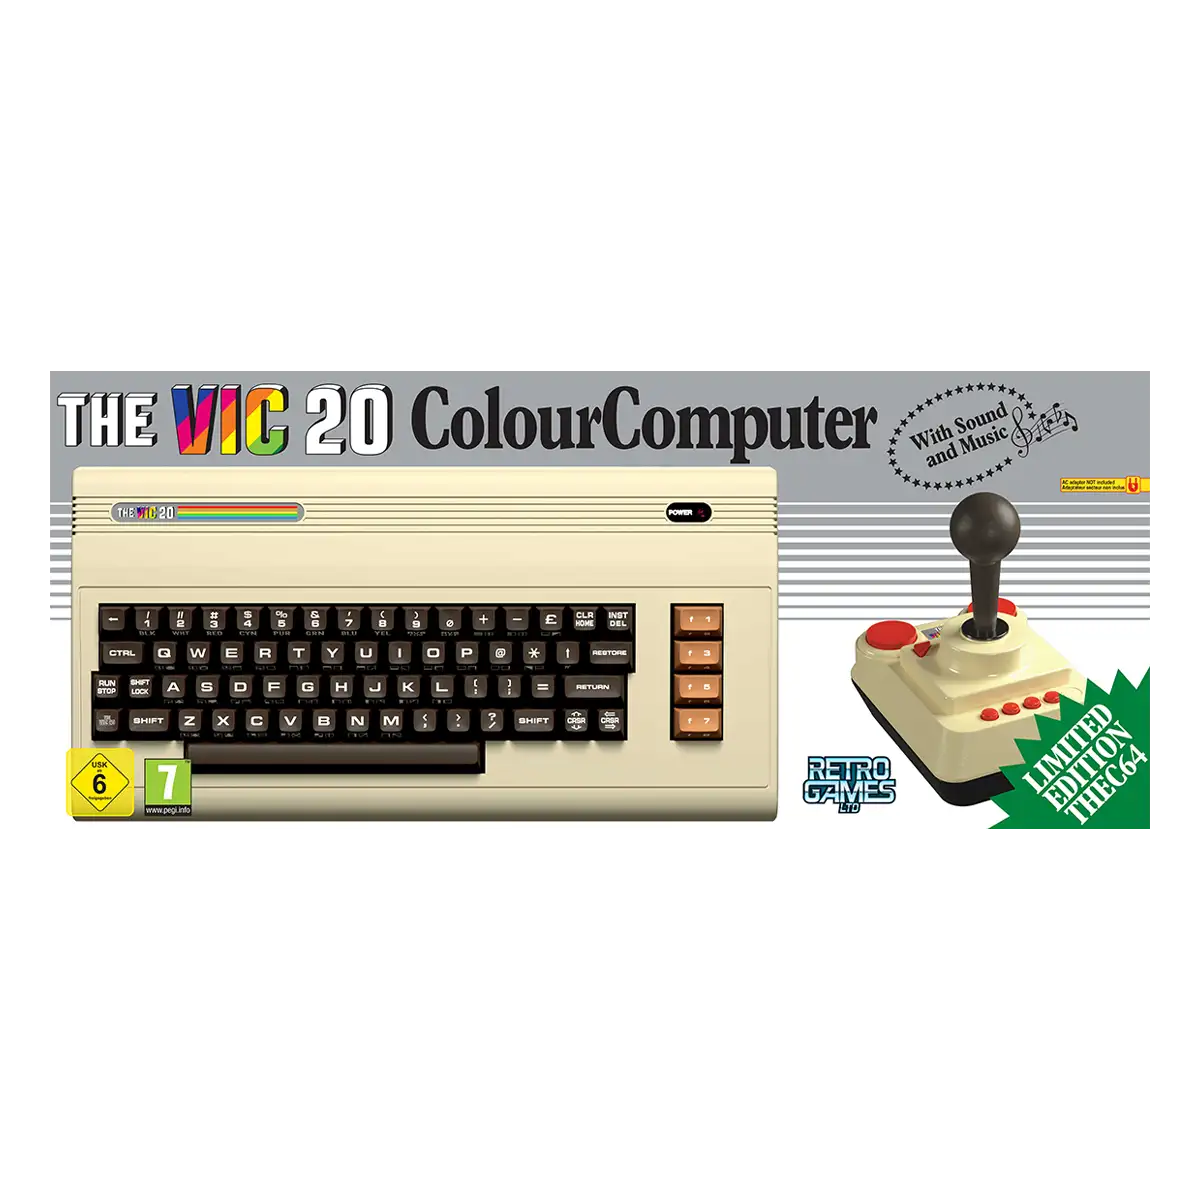 THE VIC 20 - Limited Edition C64 Cover